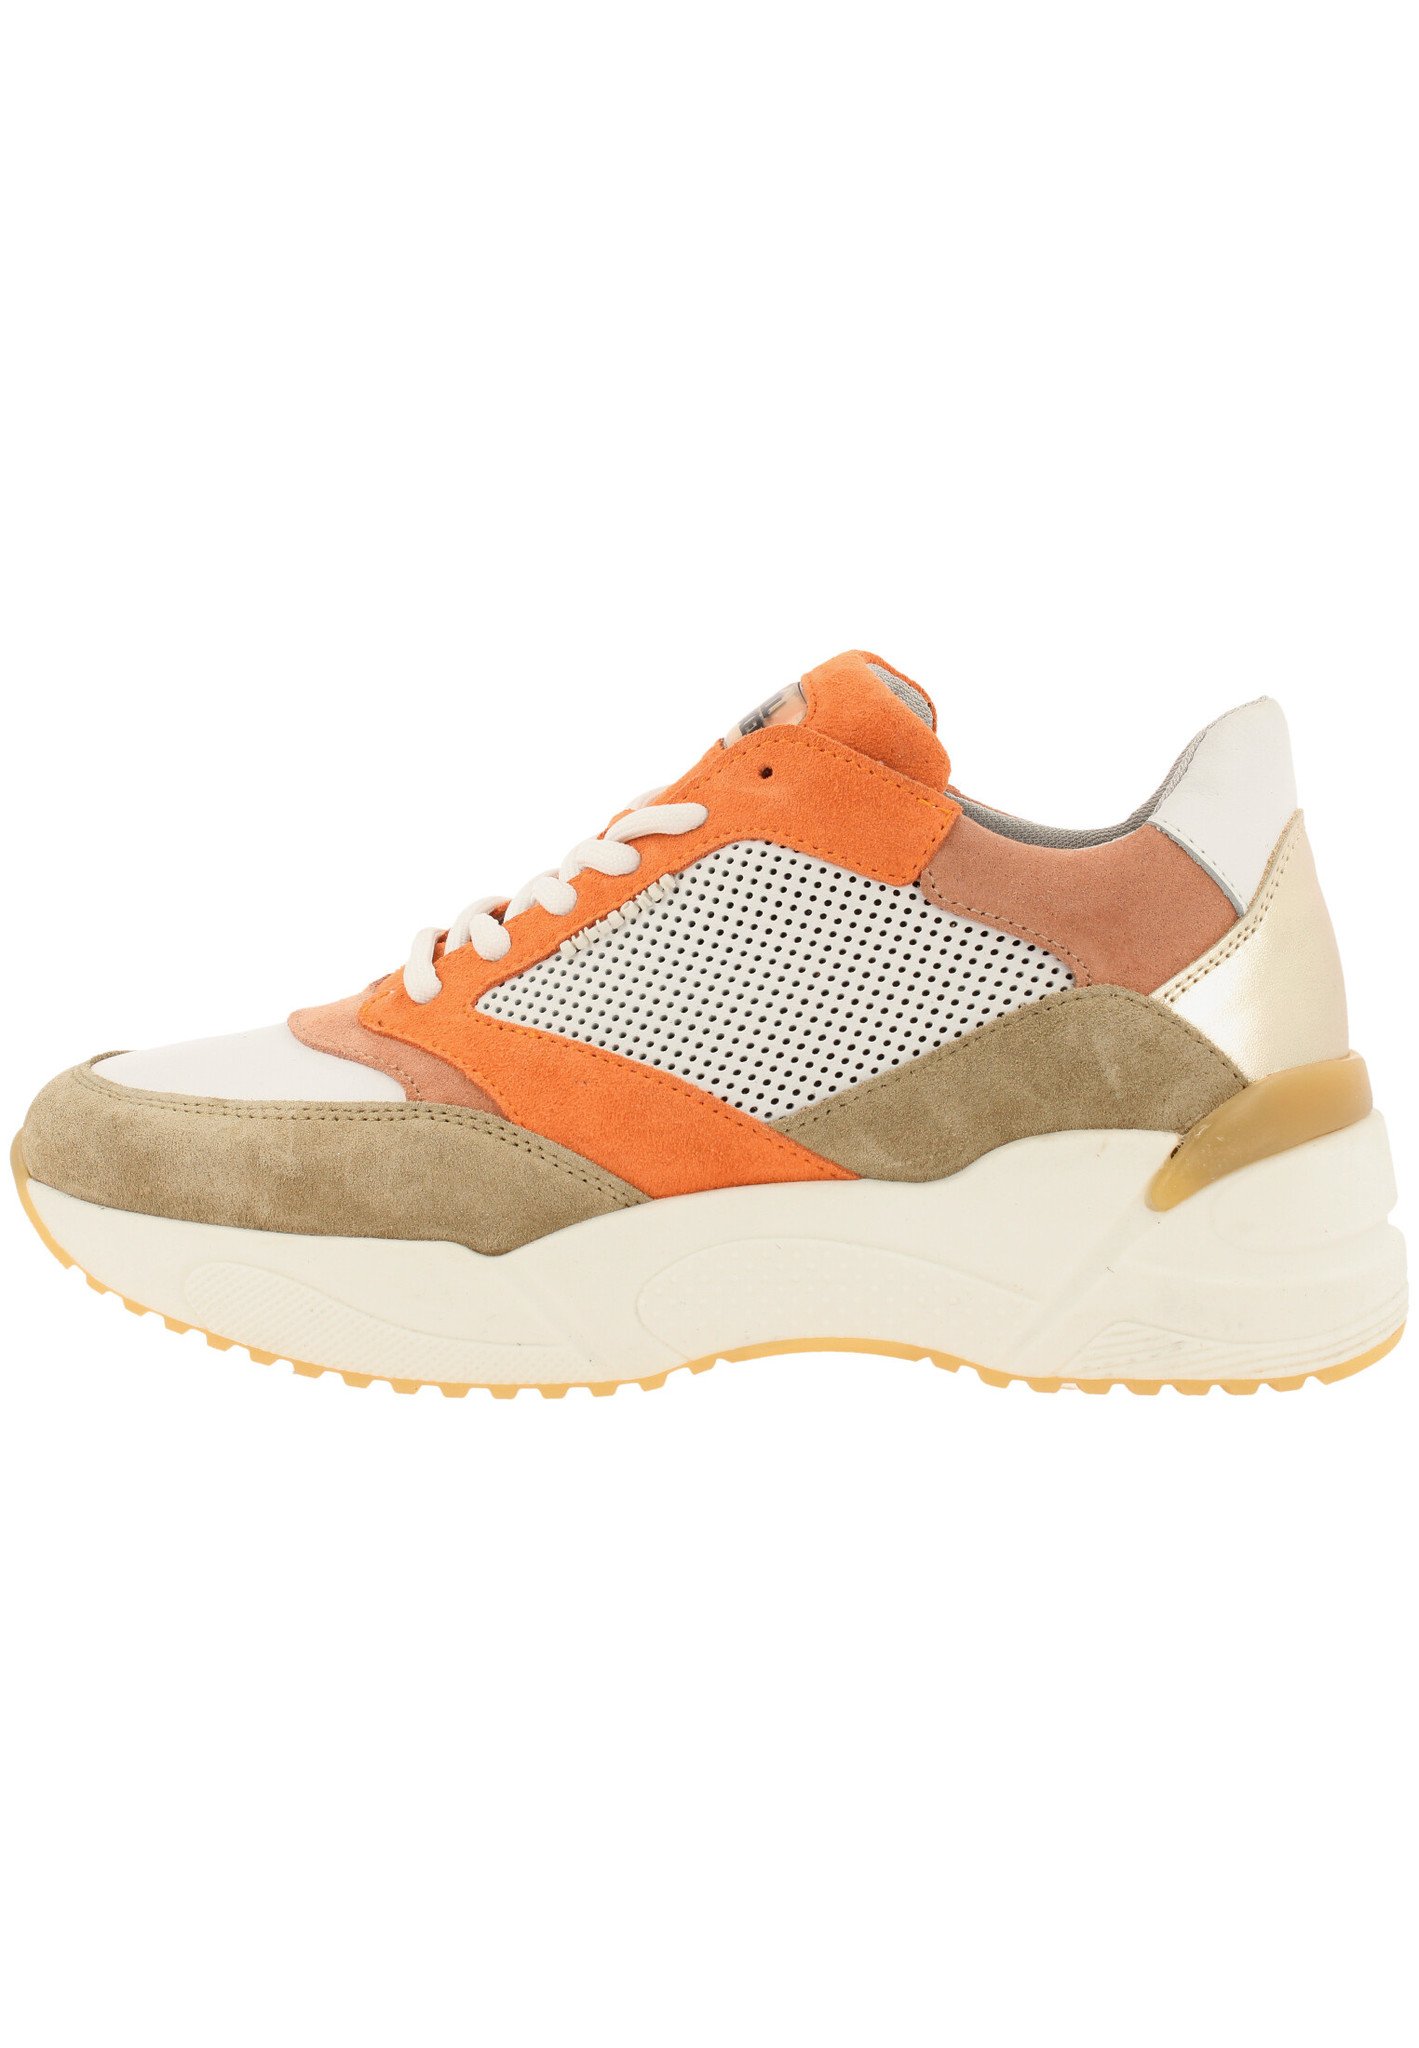 Bullboxer Ardna Mens Casual Shoe-RED | PhillipsShoes.ie